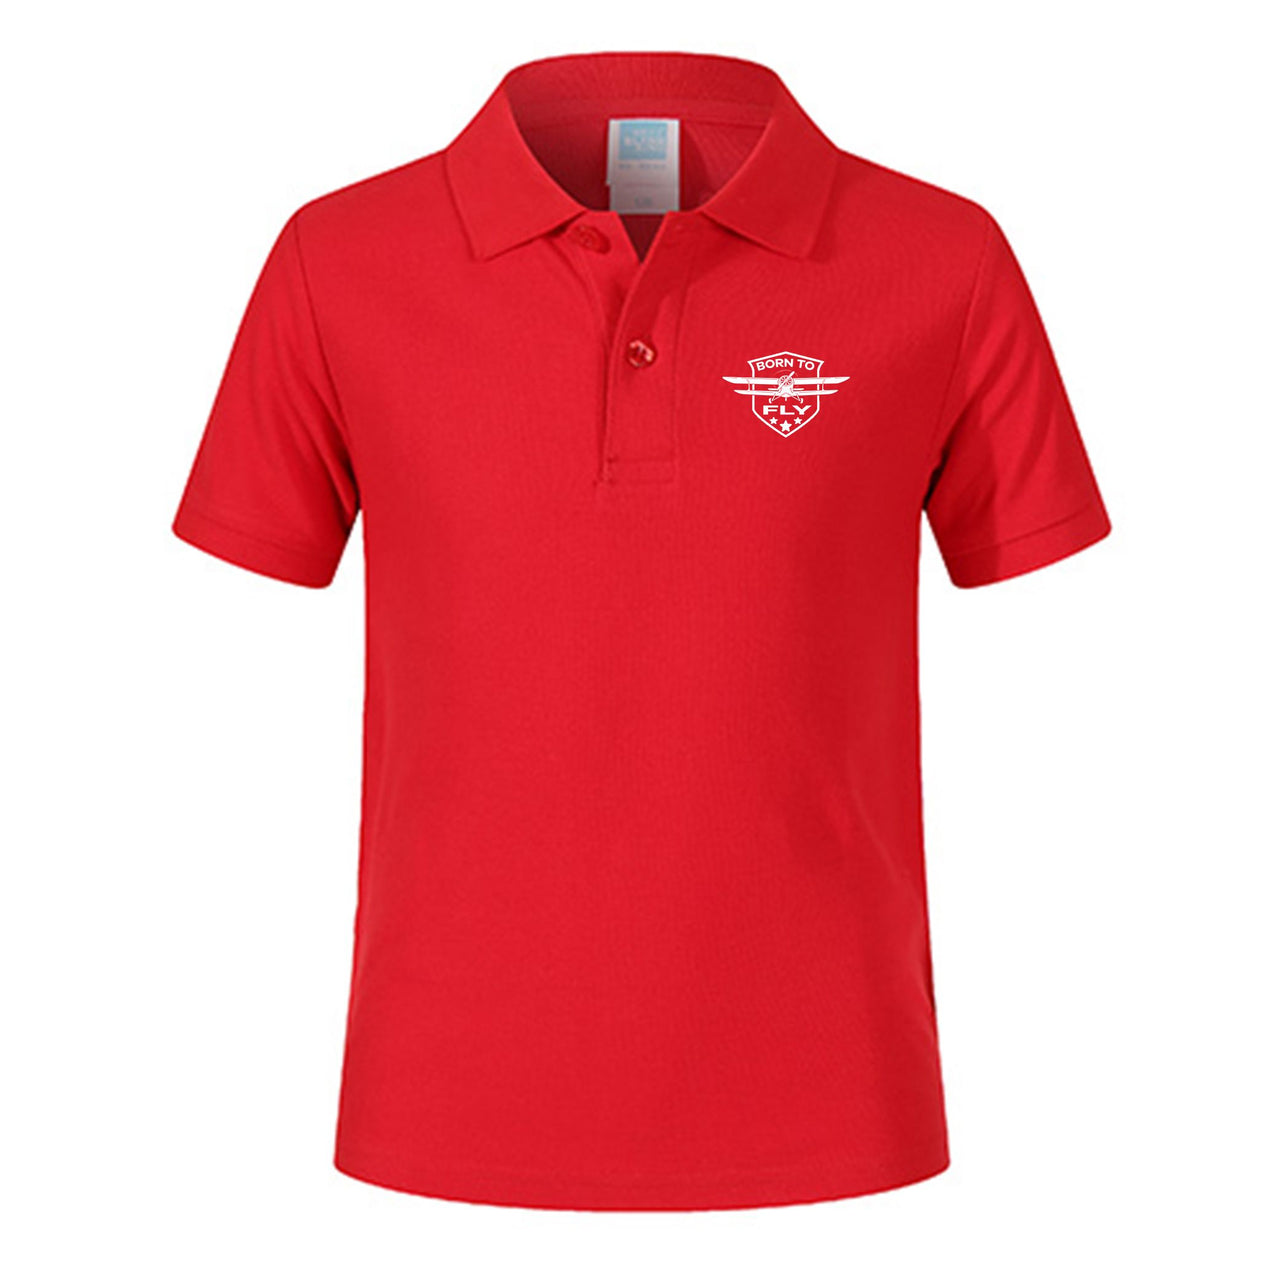 Super Born To Fly Designed Children Polo T-Shirts